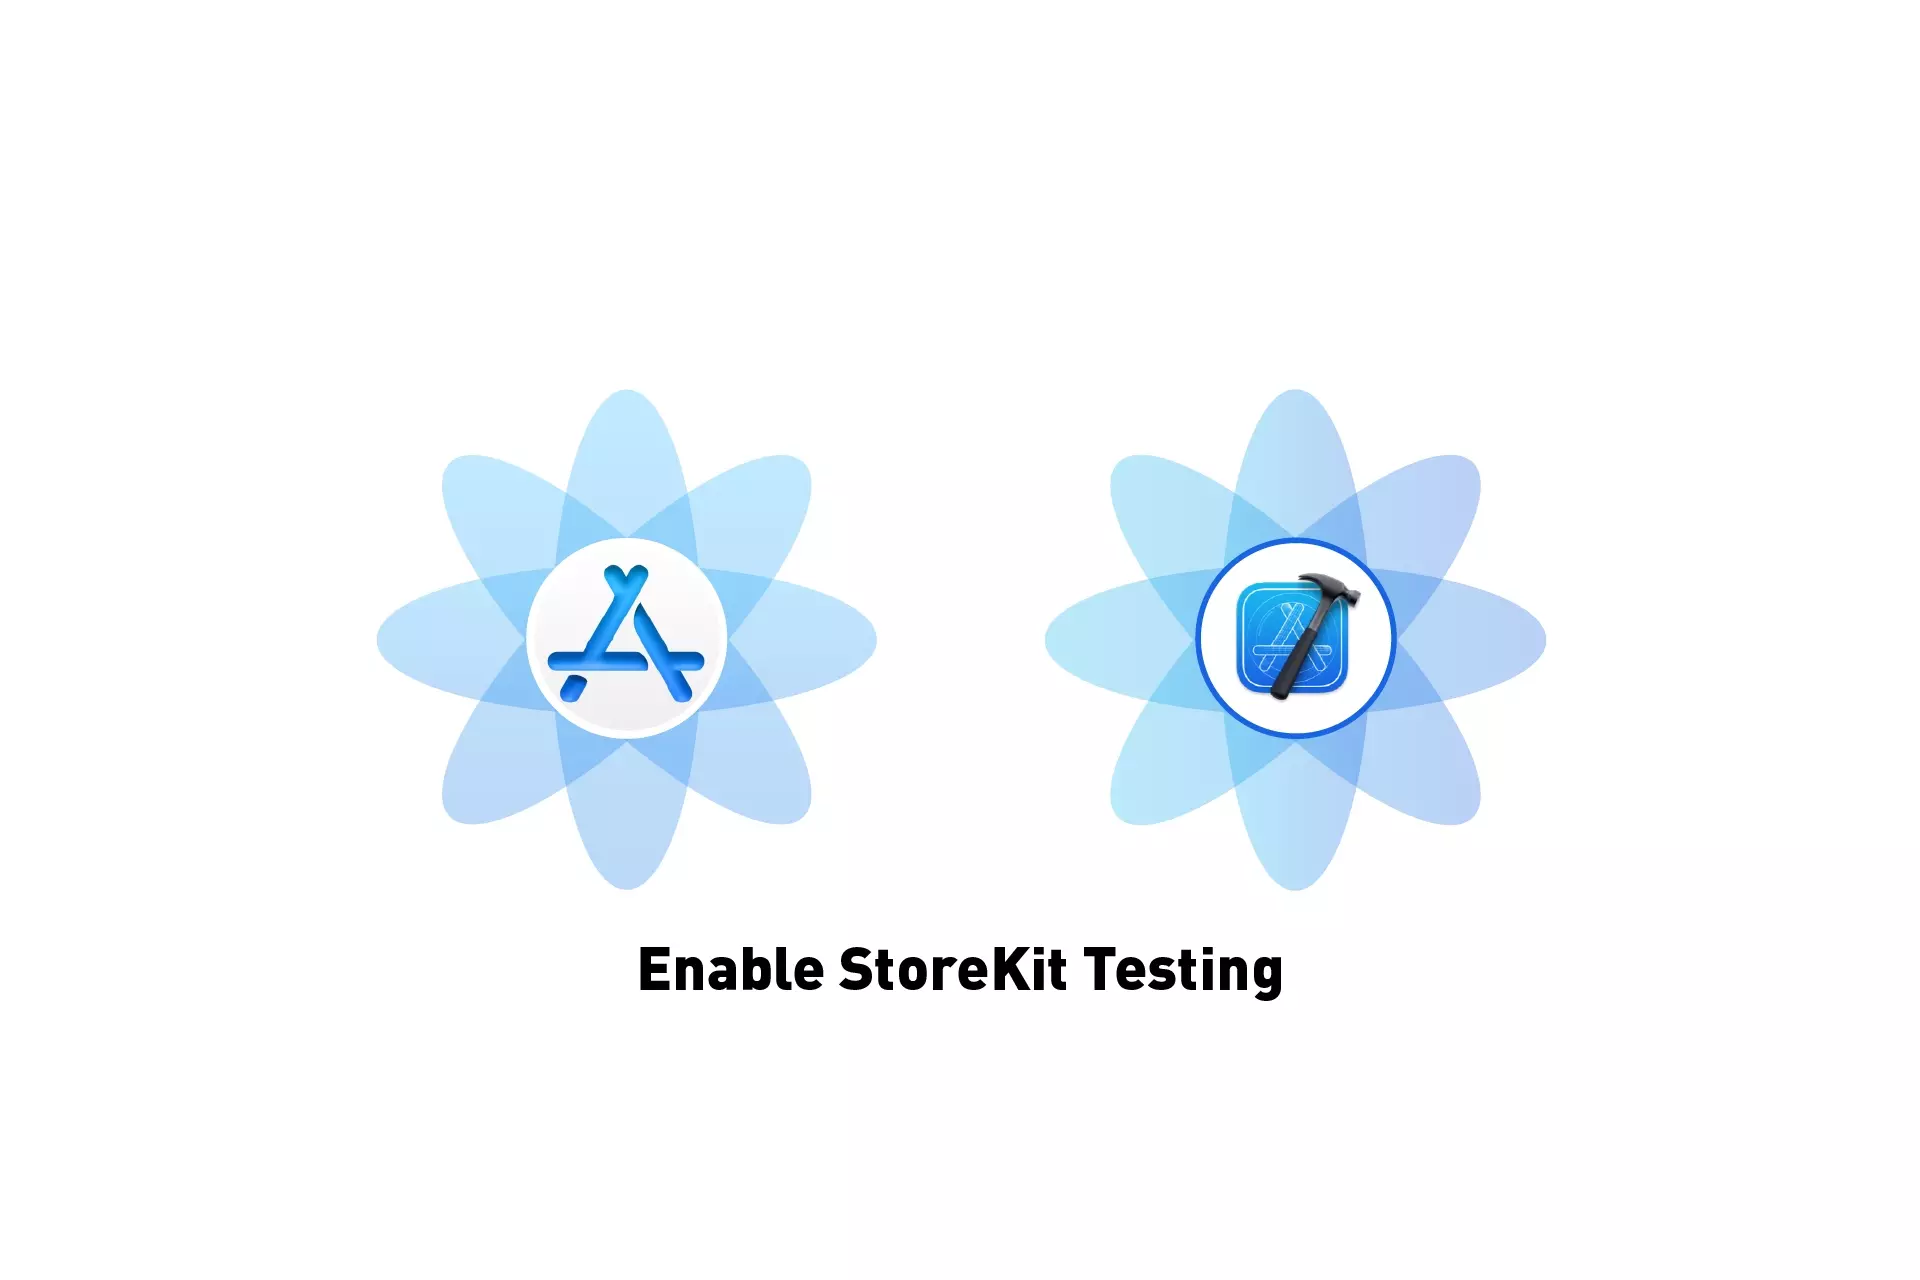 Two flowers that represents StoreKit and XCode side by side. Beneath them sits the text "Enable StoreKit Testing."